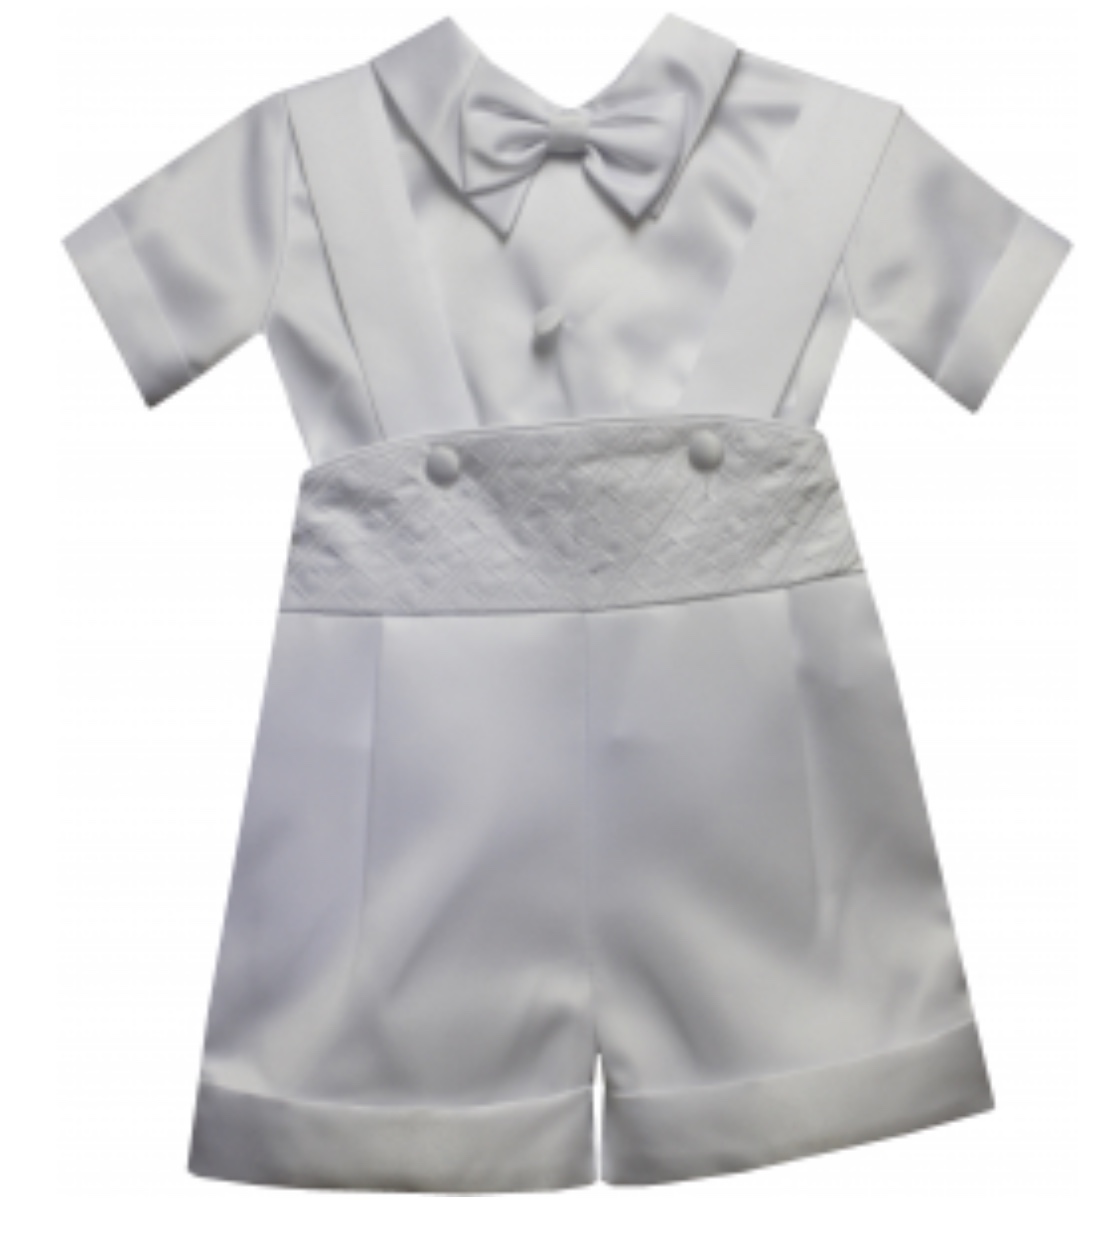 PRECIOUS ANGELS BOYS SHORT CHRISTENING SUIT WITH HAT